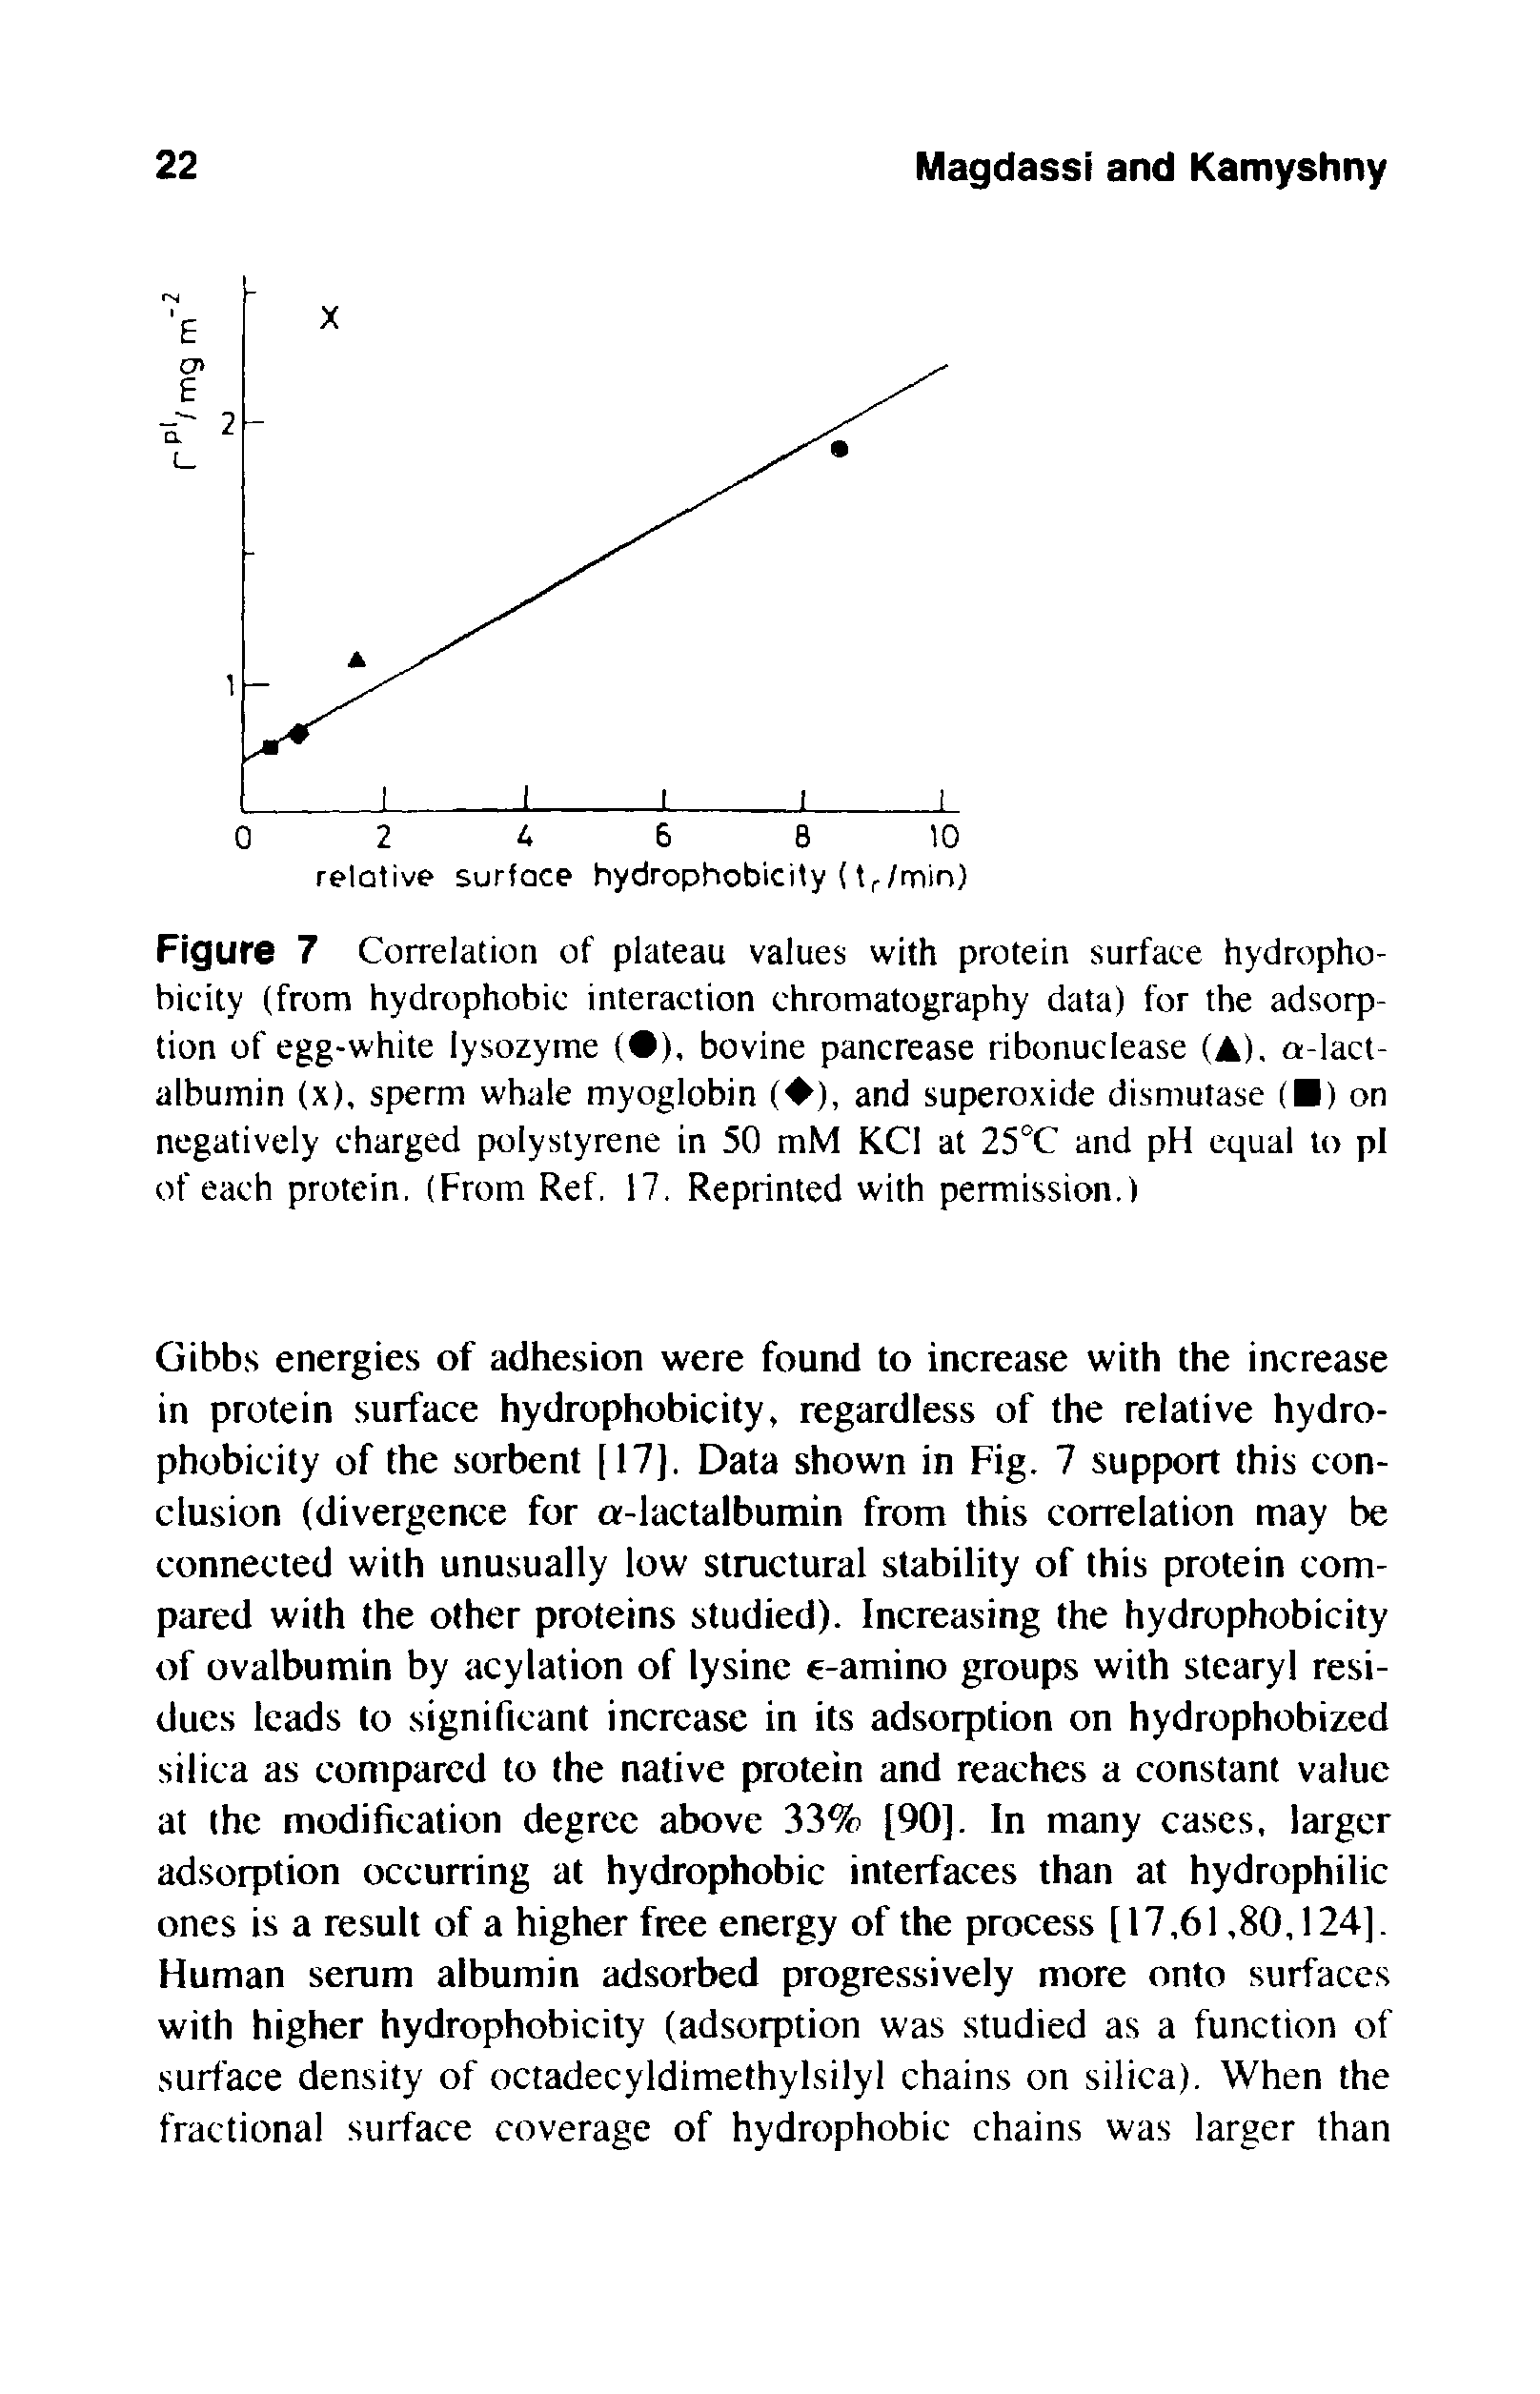 Figure 7 Correlation of plateau values with protein surface hydrophobicity (from hydrophobic interaction chromatography data) for the adsorption of egg-white lysozyme ( ), bovine pancrease ribonuclease (A), a-lact-albumin (x), sperm whale myoglobin ( ), and superoxide dismutase ( ) on negatively charged polystyrene in 50 mM KCI at 25°C and pH equal to pi of each protein. (From Ref. 17. Reprinted with permission.)...